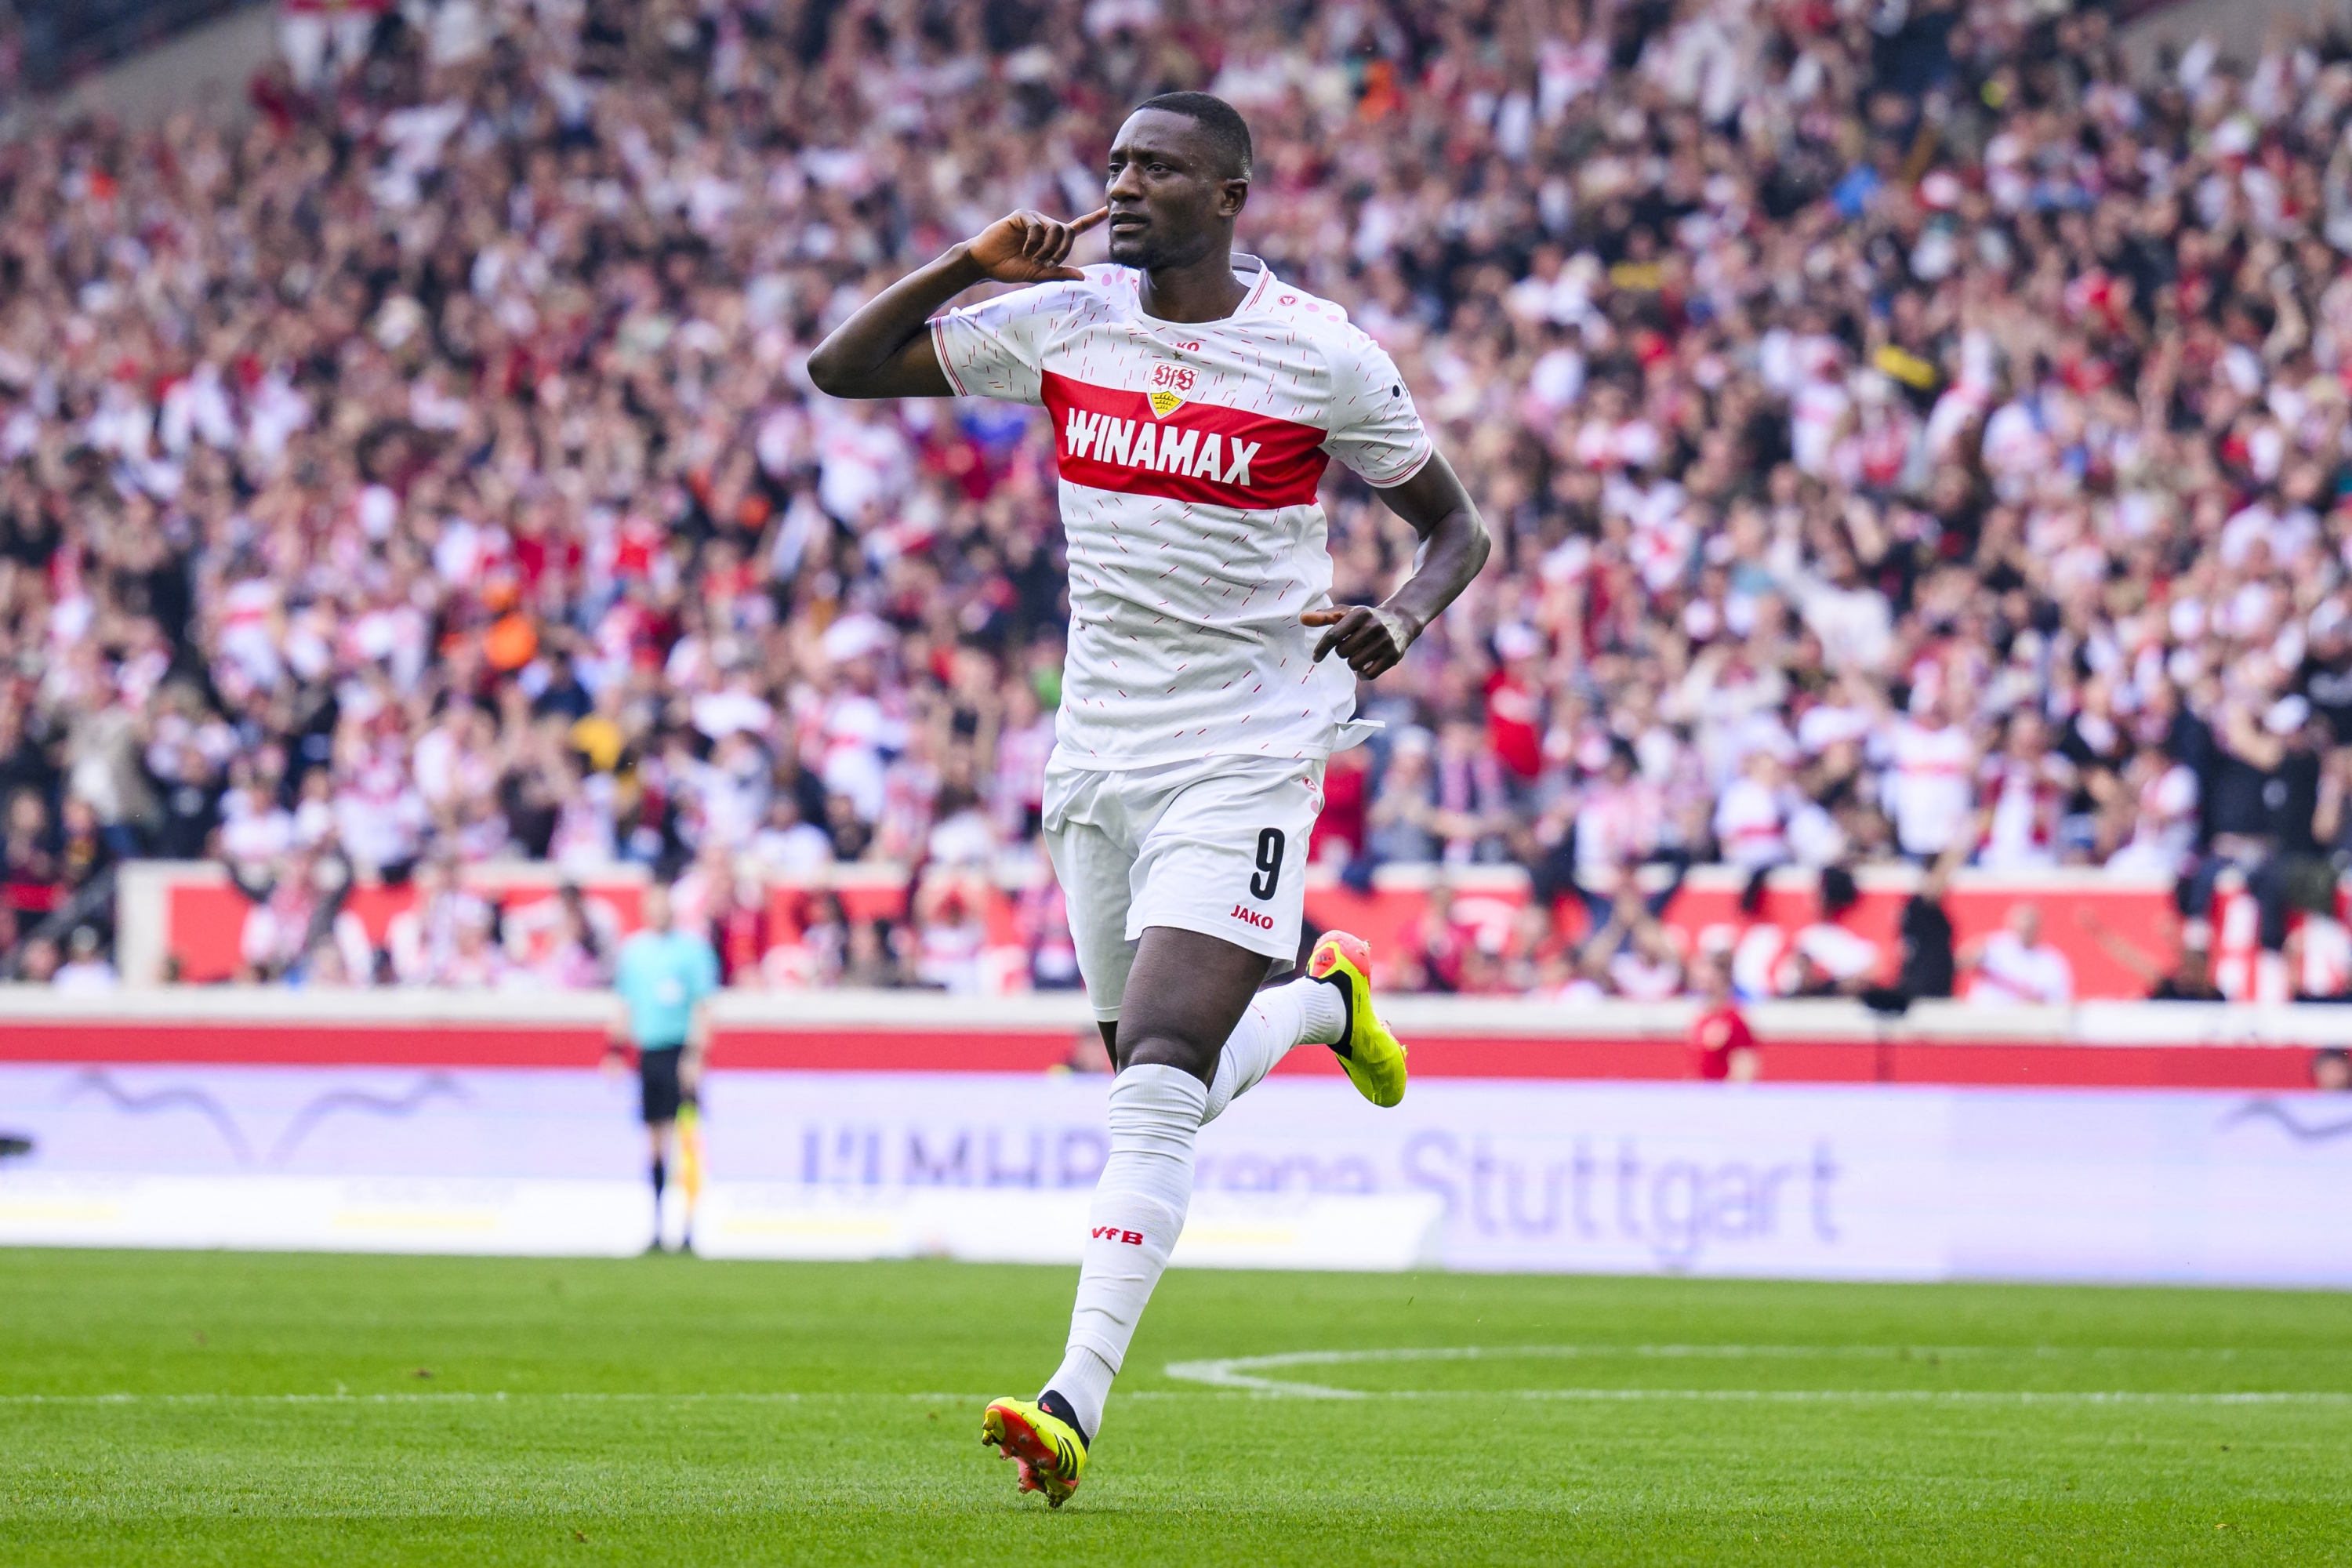 31 March 2024, Baden-W¸rttemberg, Stuttgart: Soccer: Bundesliga, VfB Stuttgart - 1. FC Heidenheim, Matchday 27, MHPArena. Stuttgart's Serhou Guirassy celebrates after scoring a goal. Photo: Tom Weller/dpa - IMPORTANT NOTE: In accordance with the regulations of the DFL German Football League and the DFB German Football Association, it is prohibited to utilize or have utilized photographs taken in the stadium and/or of the match in the form of sequential images and/or video-like photo series. (Photo by Tom Weller / DPA / dpa Picture-Alliance via AFP)